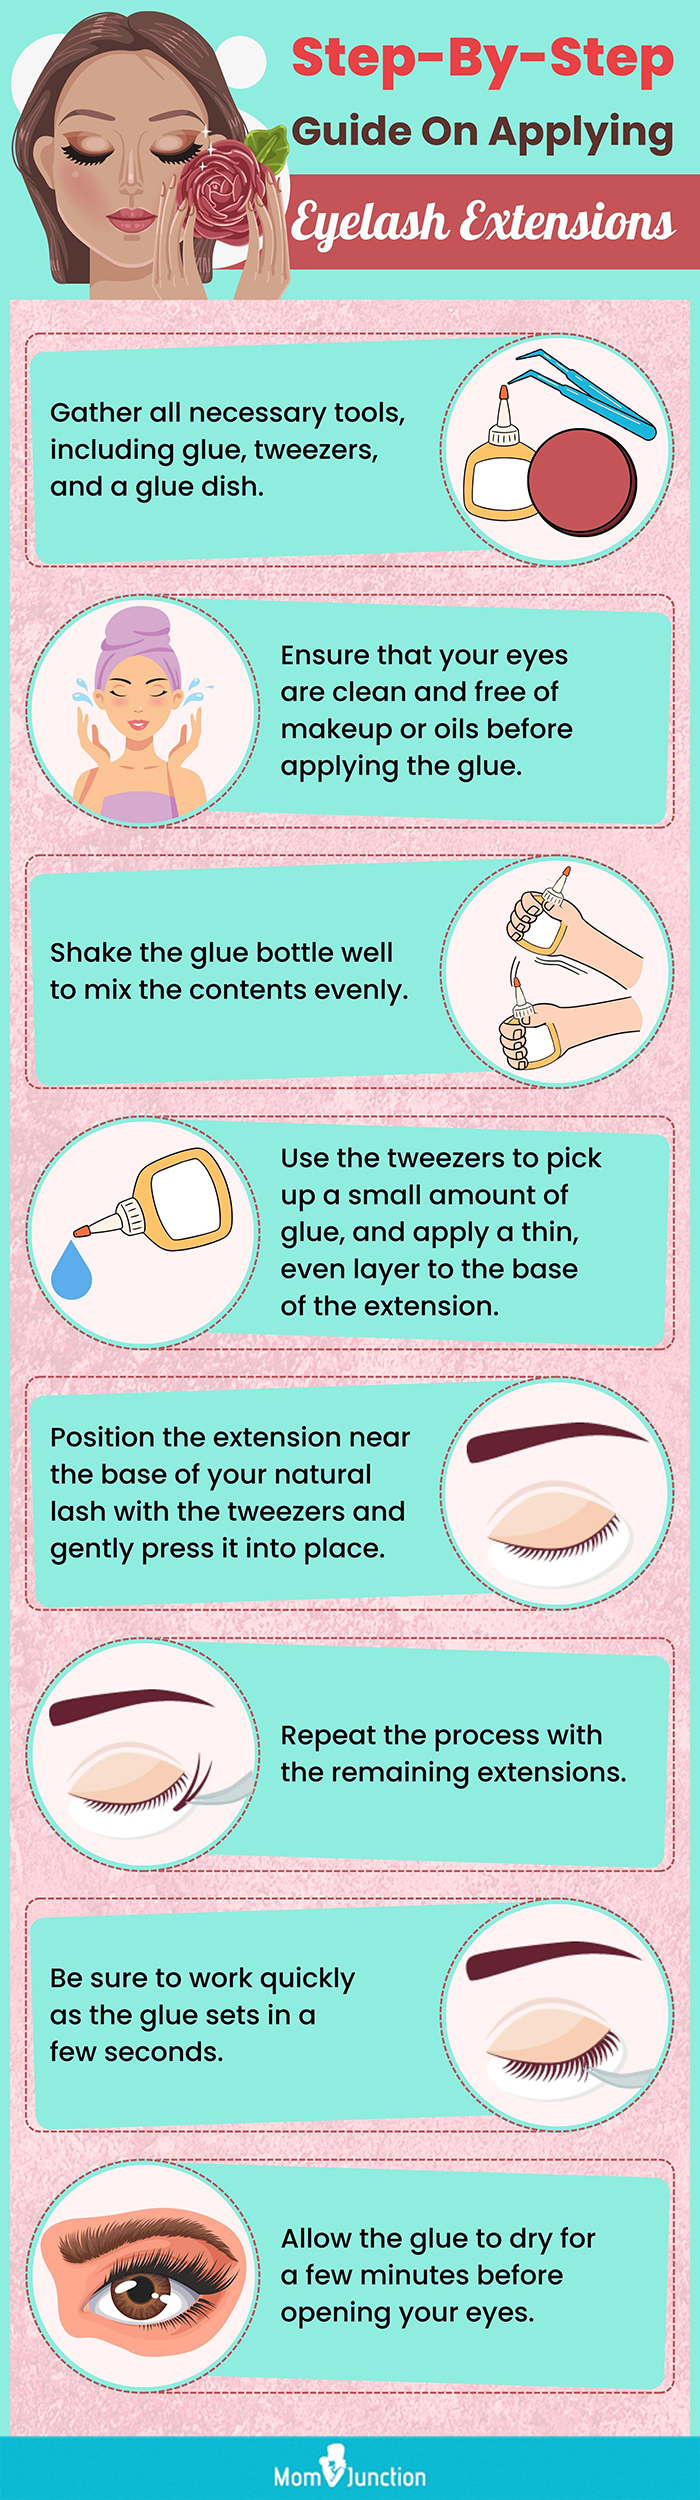 Step-By-Step Guide On Applying Eyelash Extensions